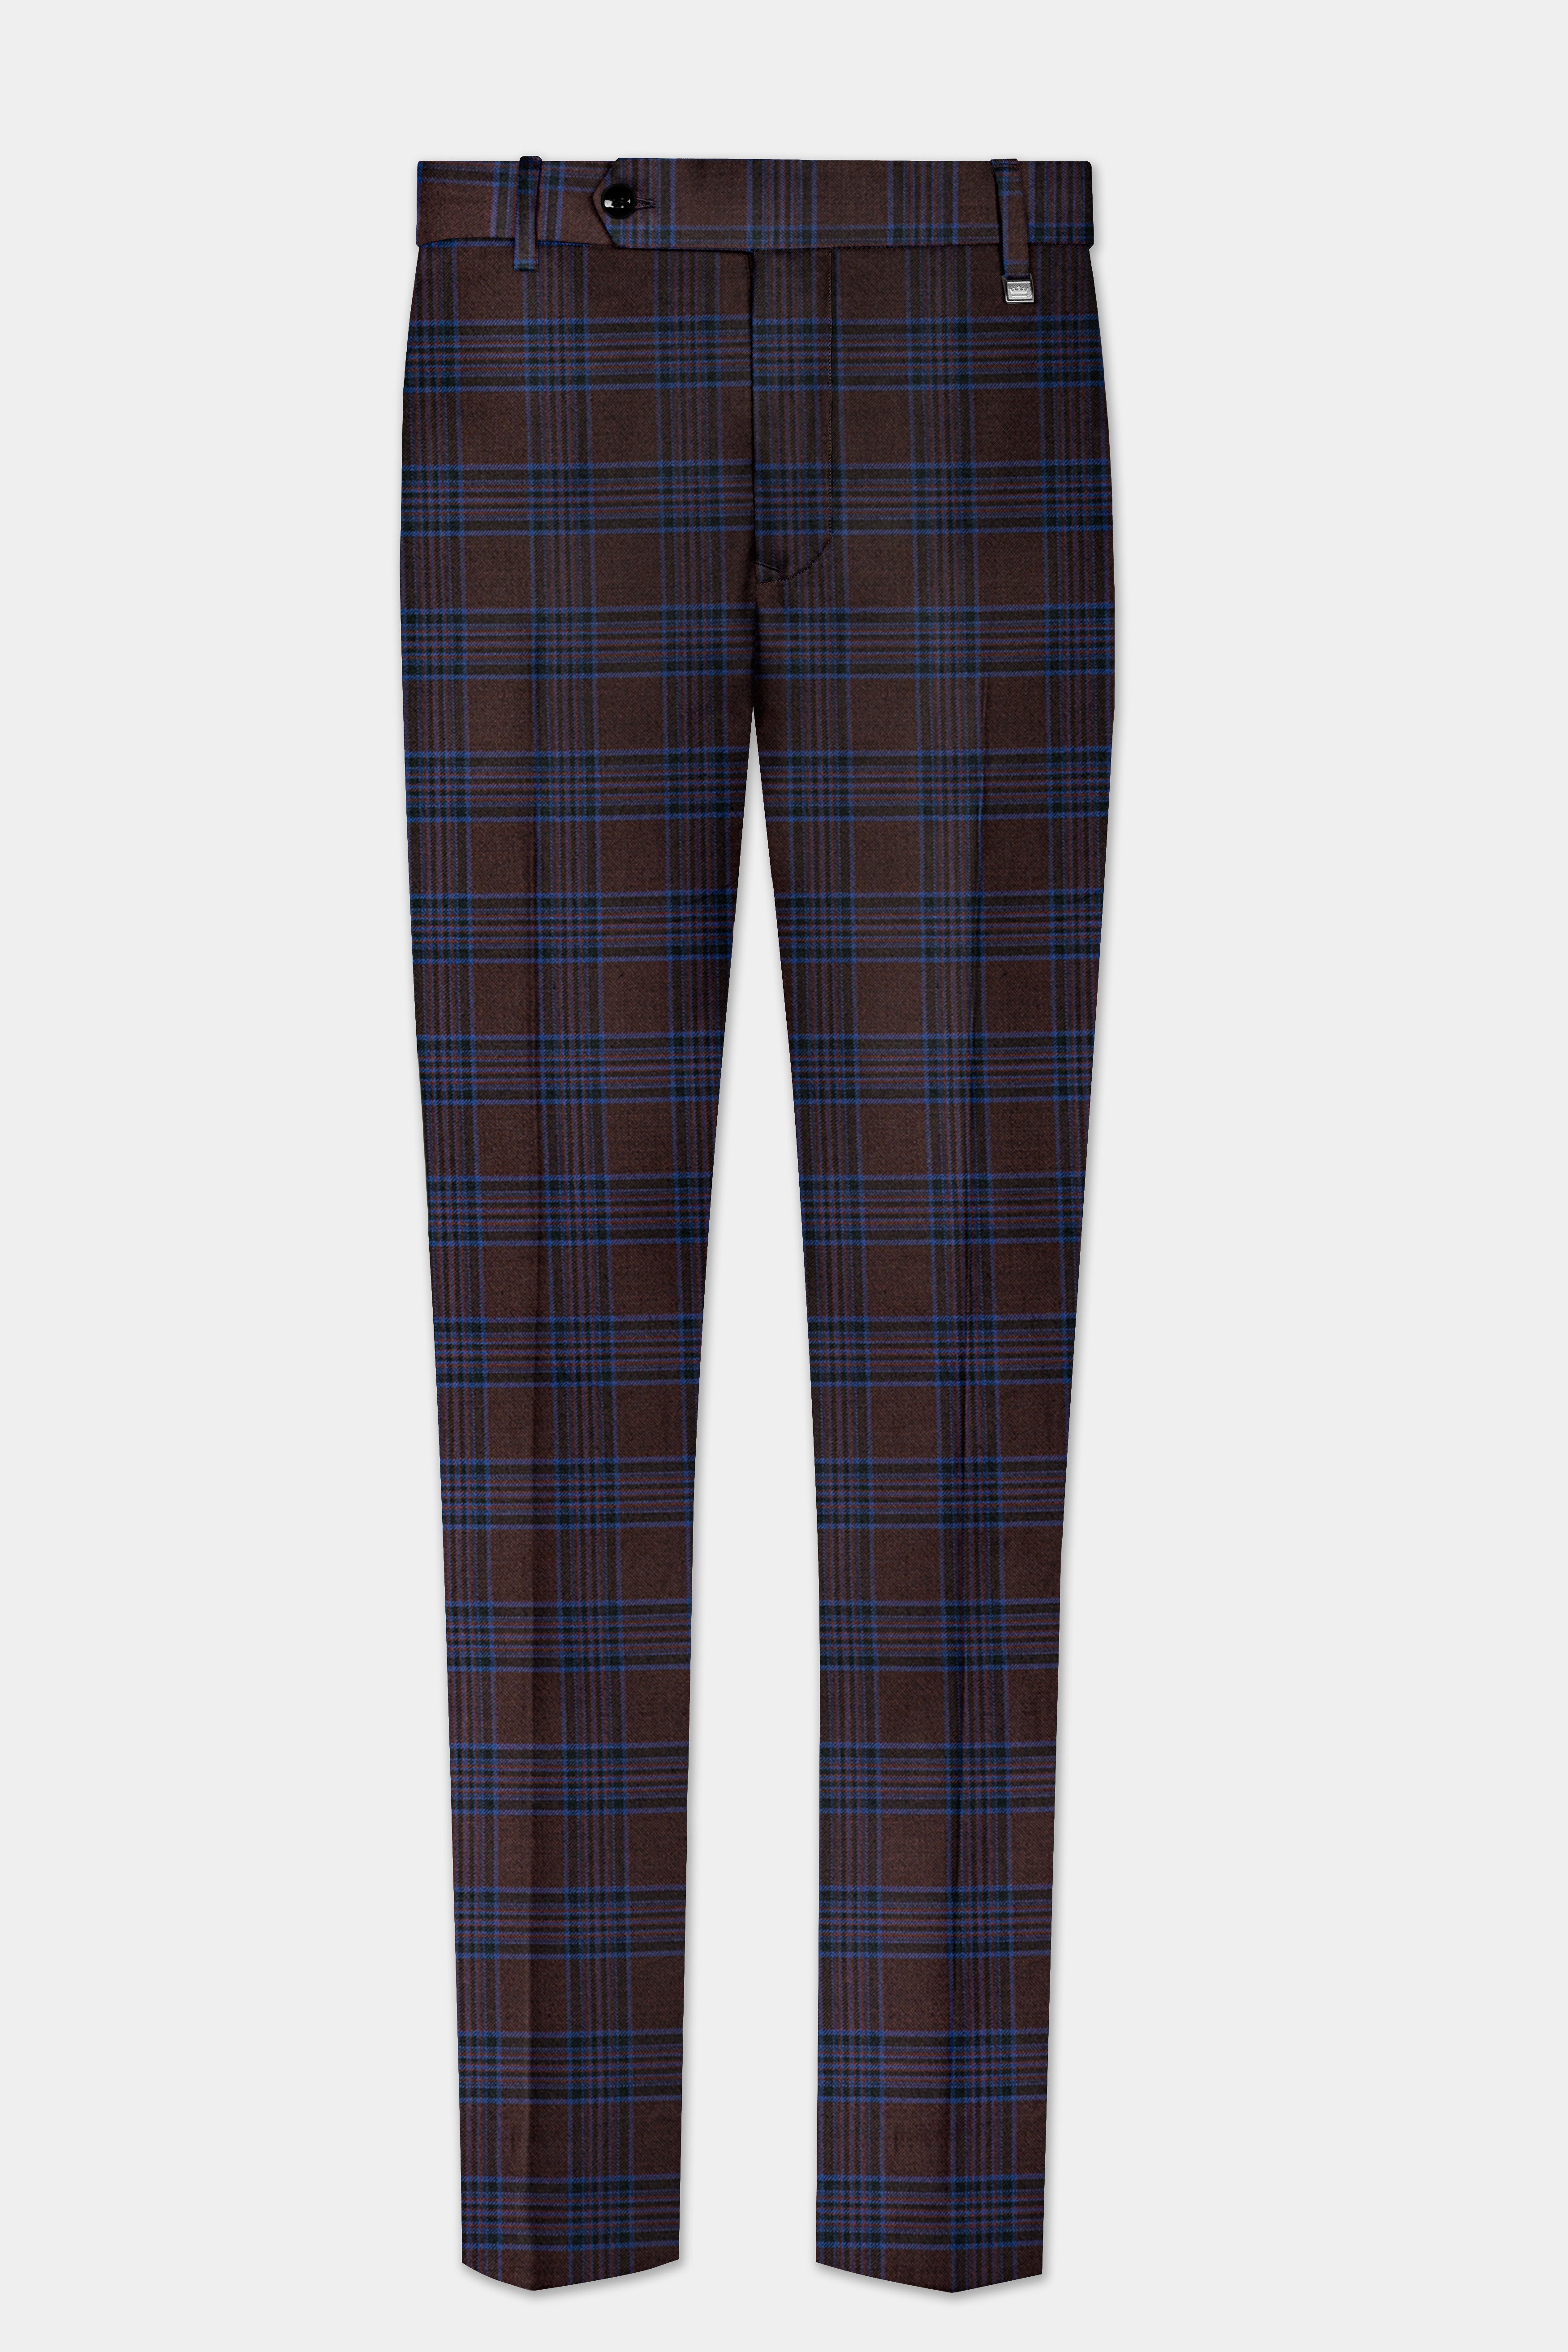 Bistre Brown with Nile Blue Plaid Wool Blend Pant